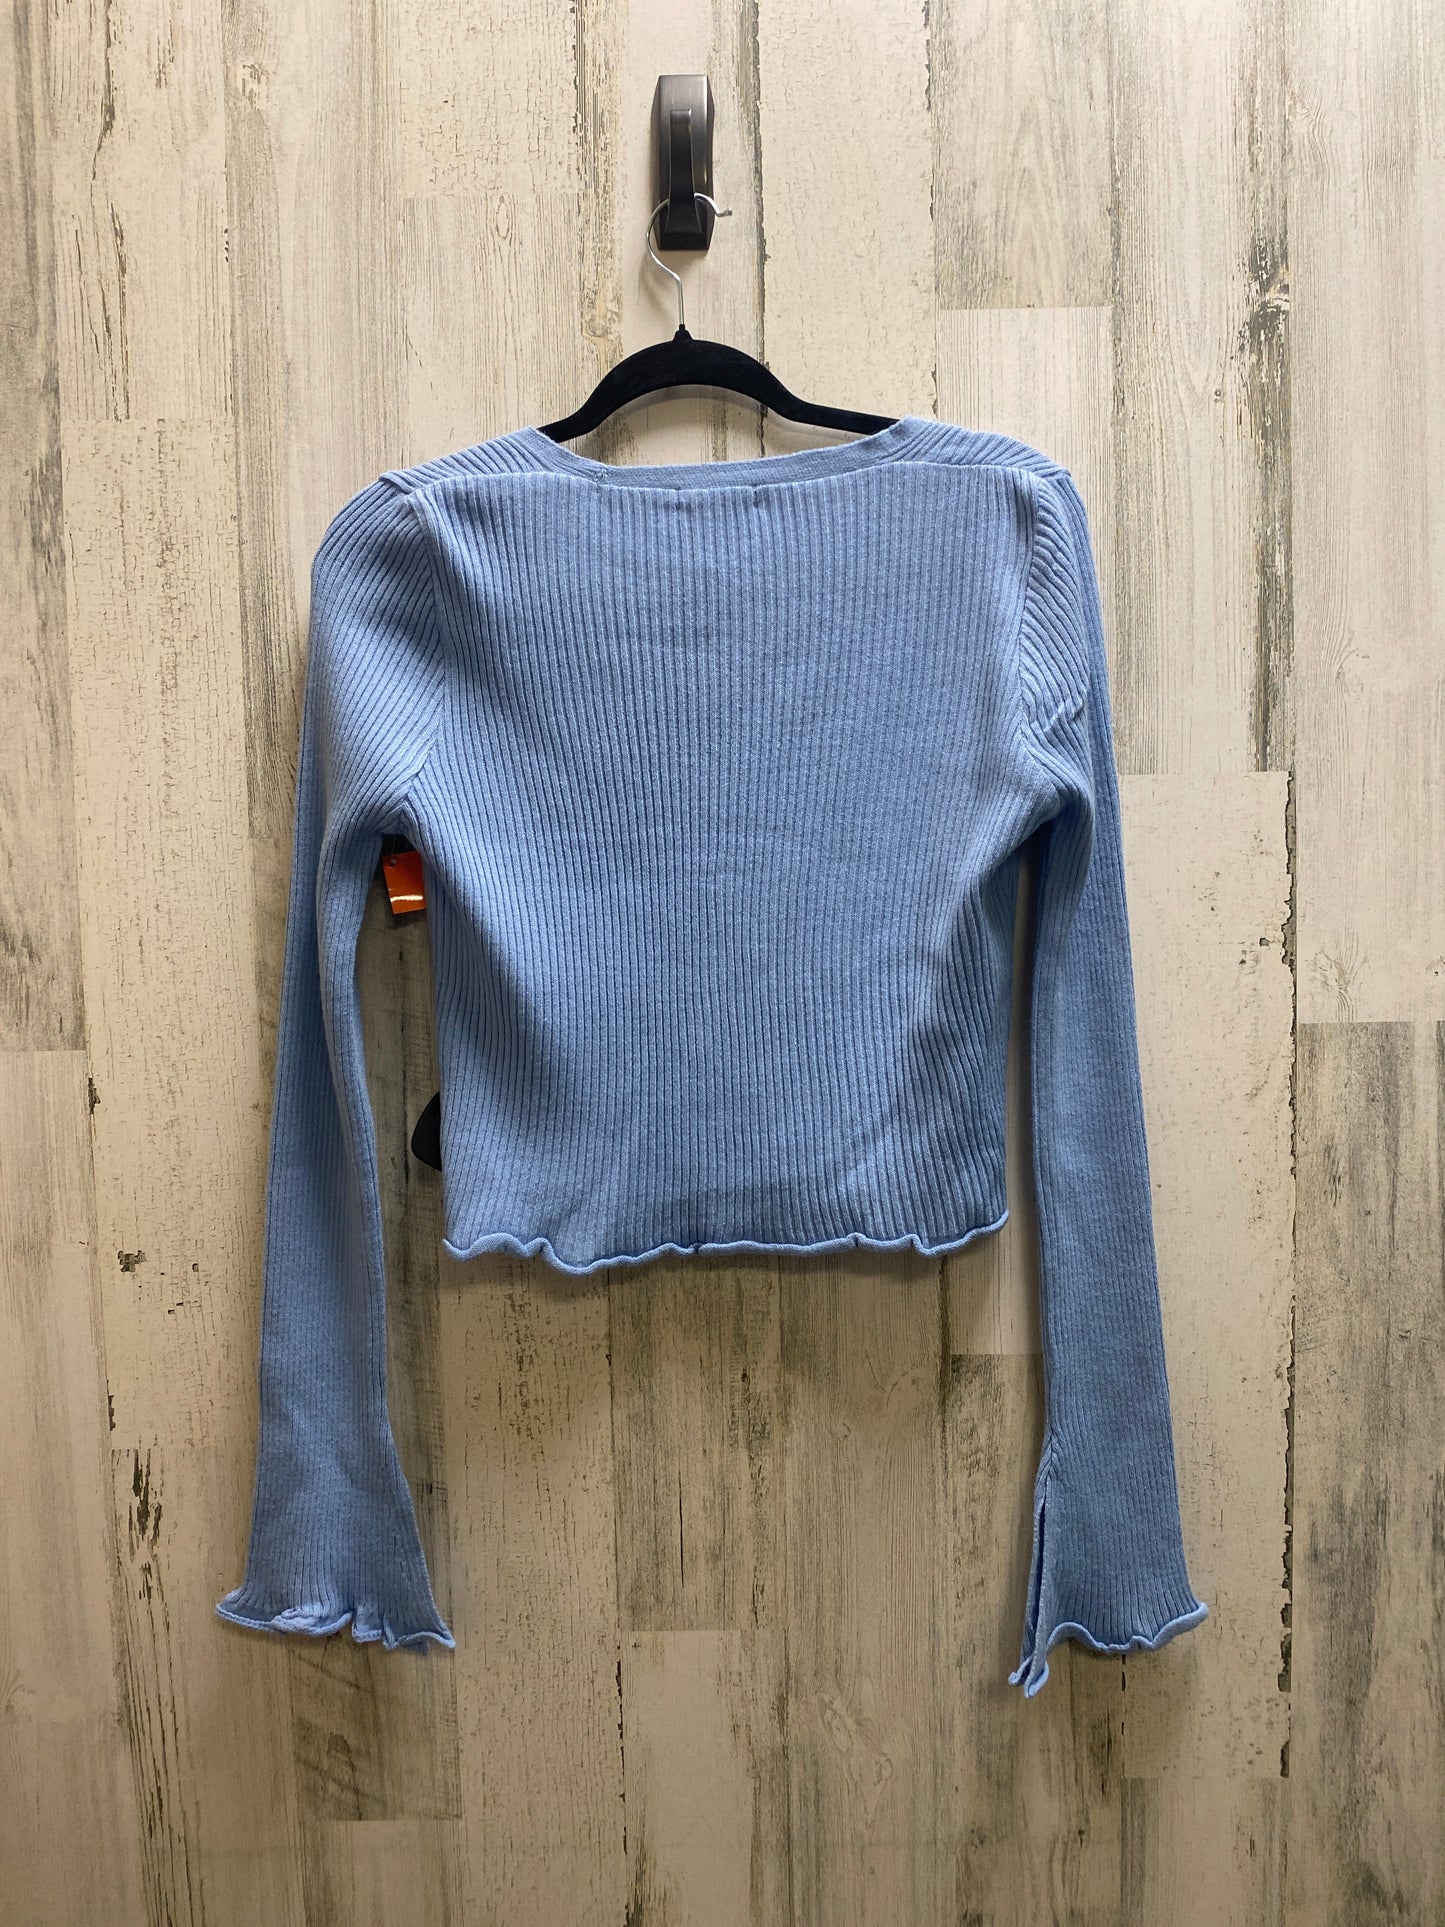 Sweater By Nasty Gal  Size: S